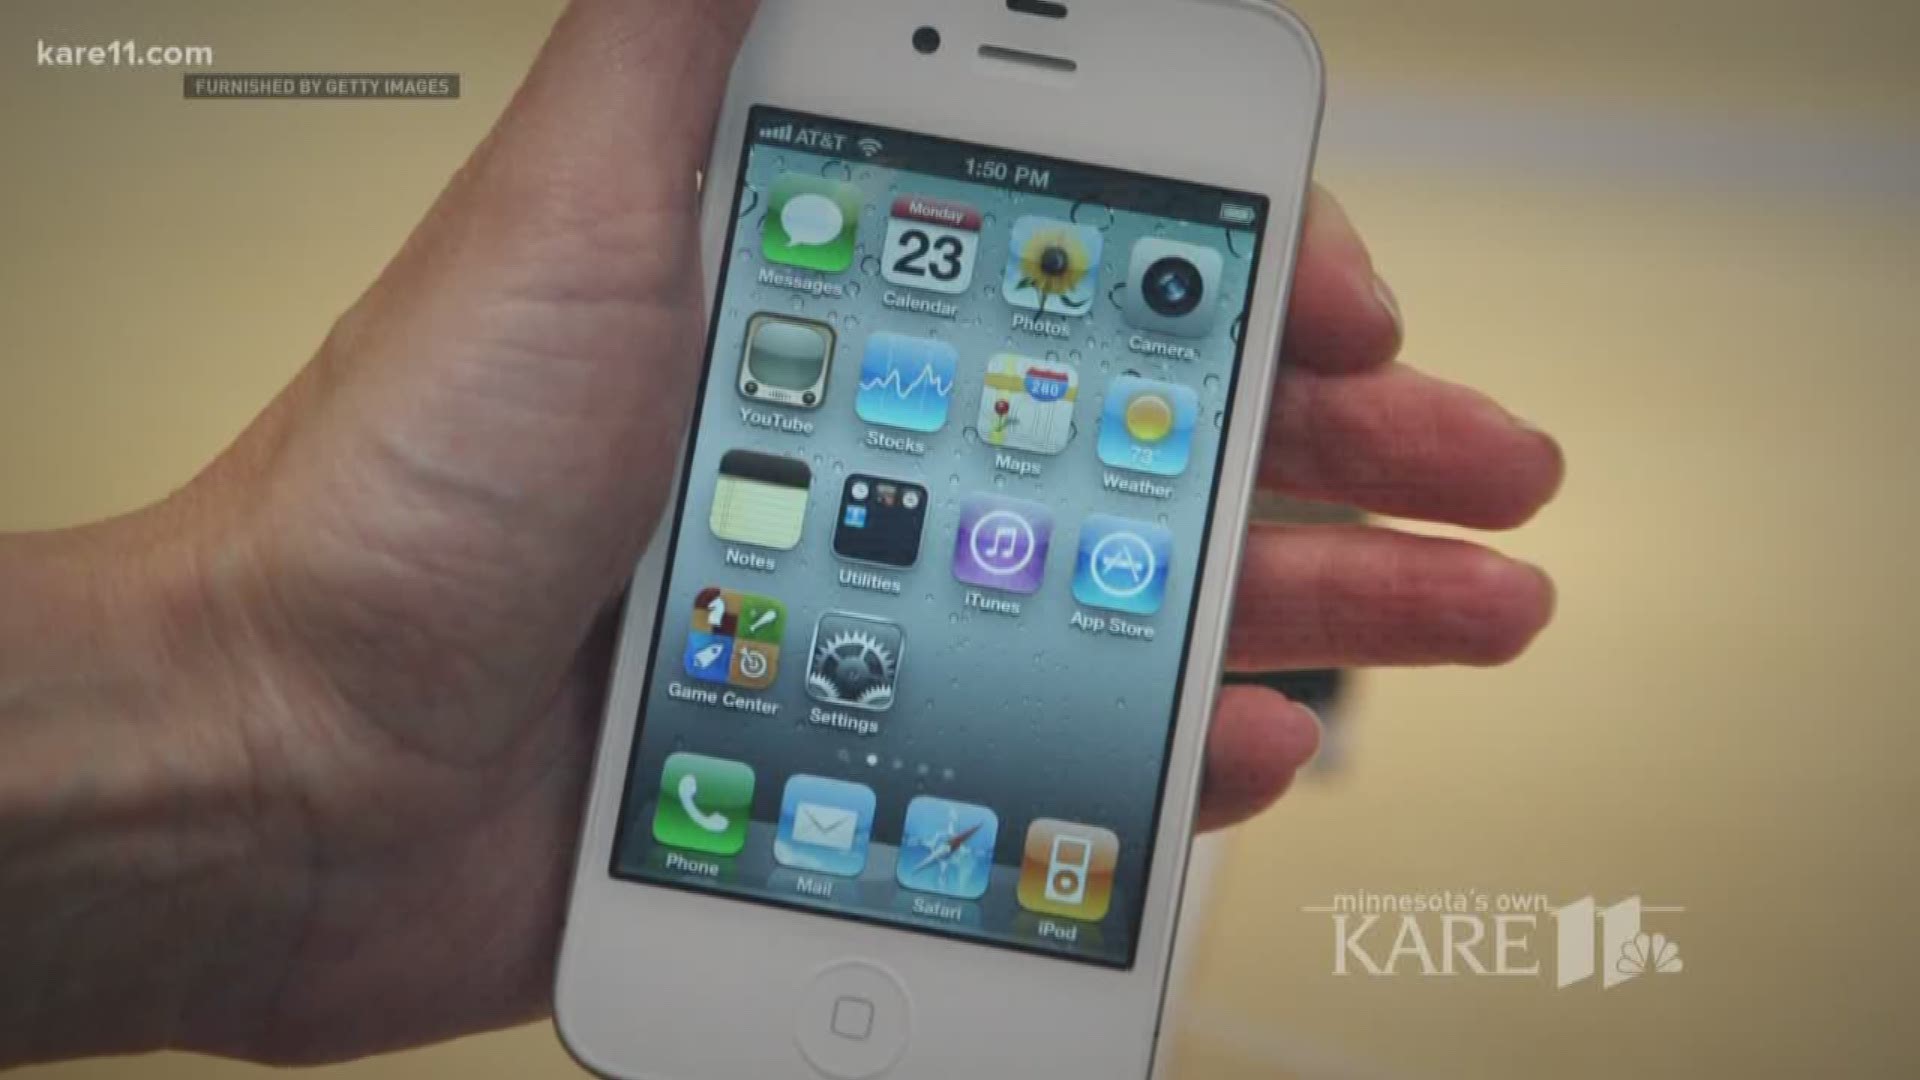 What some owners of older generation iPhones notice is that as they keep updating new software -- as recommended by Apple -- their older phones eventually slow down. So much, that they feel the need to buy a new one again. http://kare11.tv/2zmE6Rw